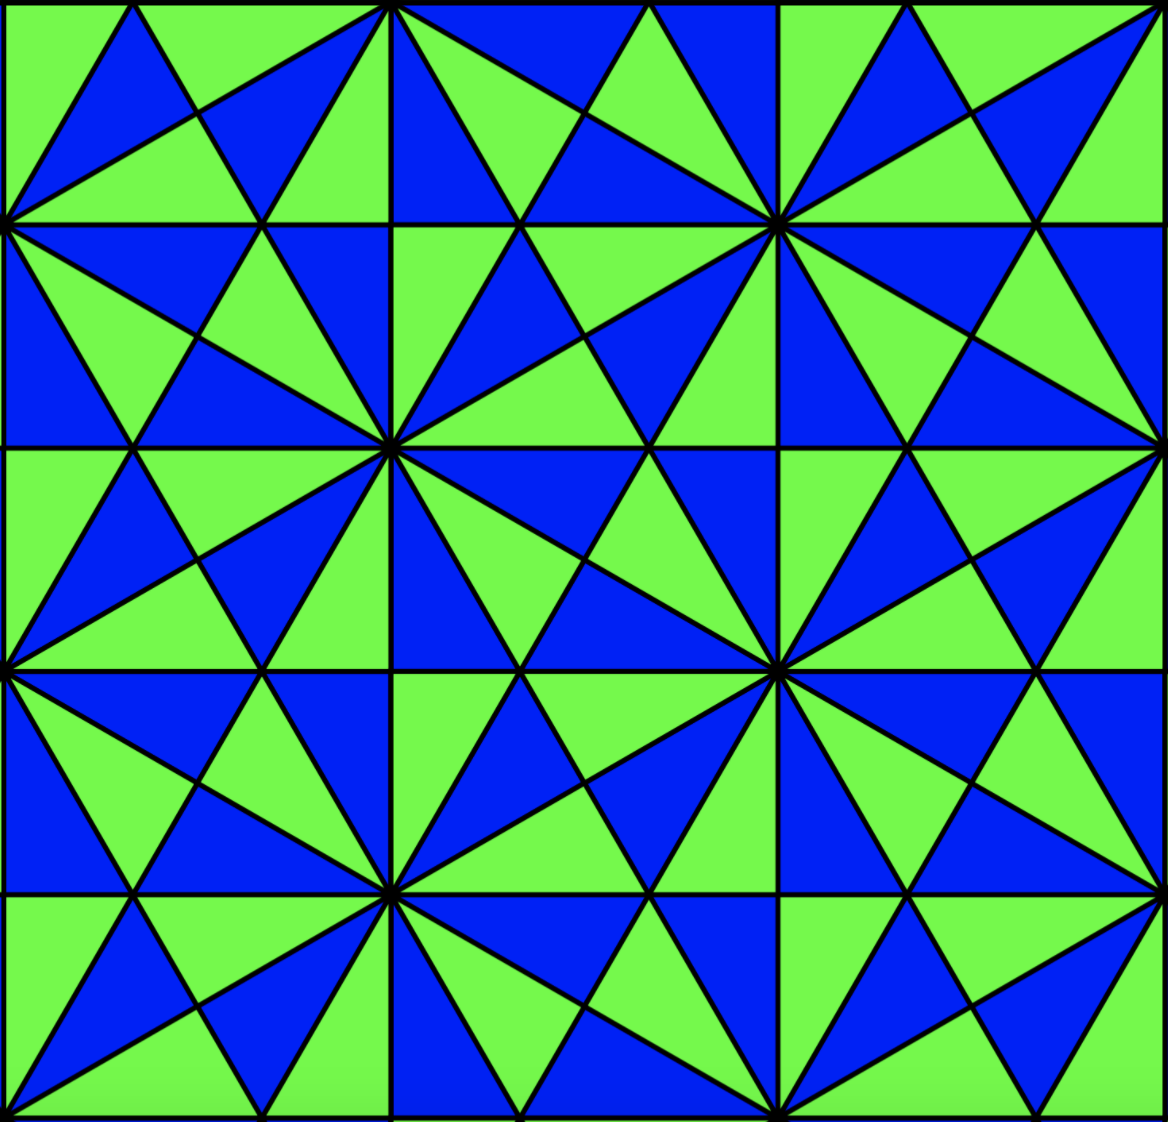 Diagram with tiling.